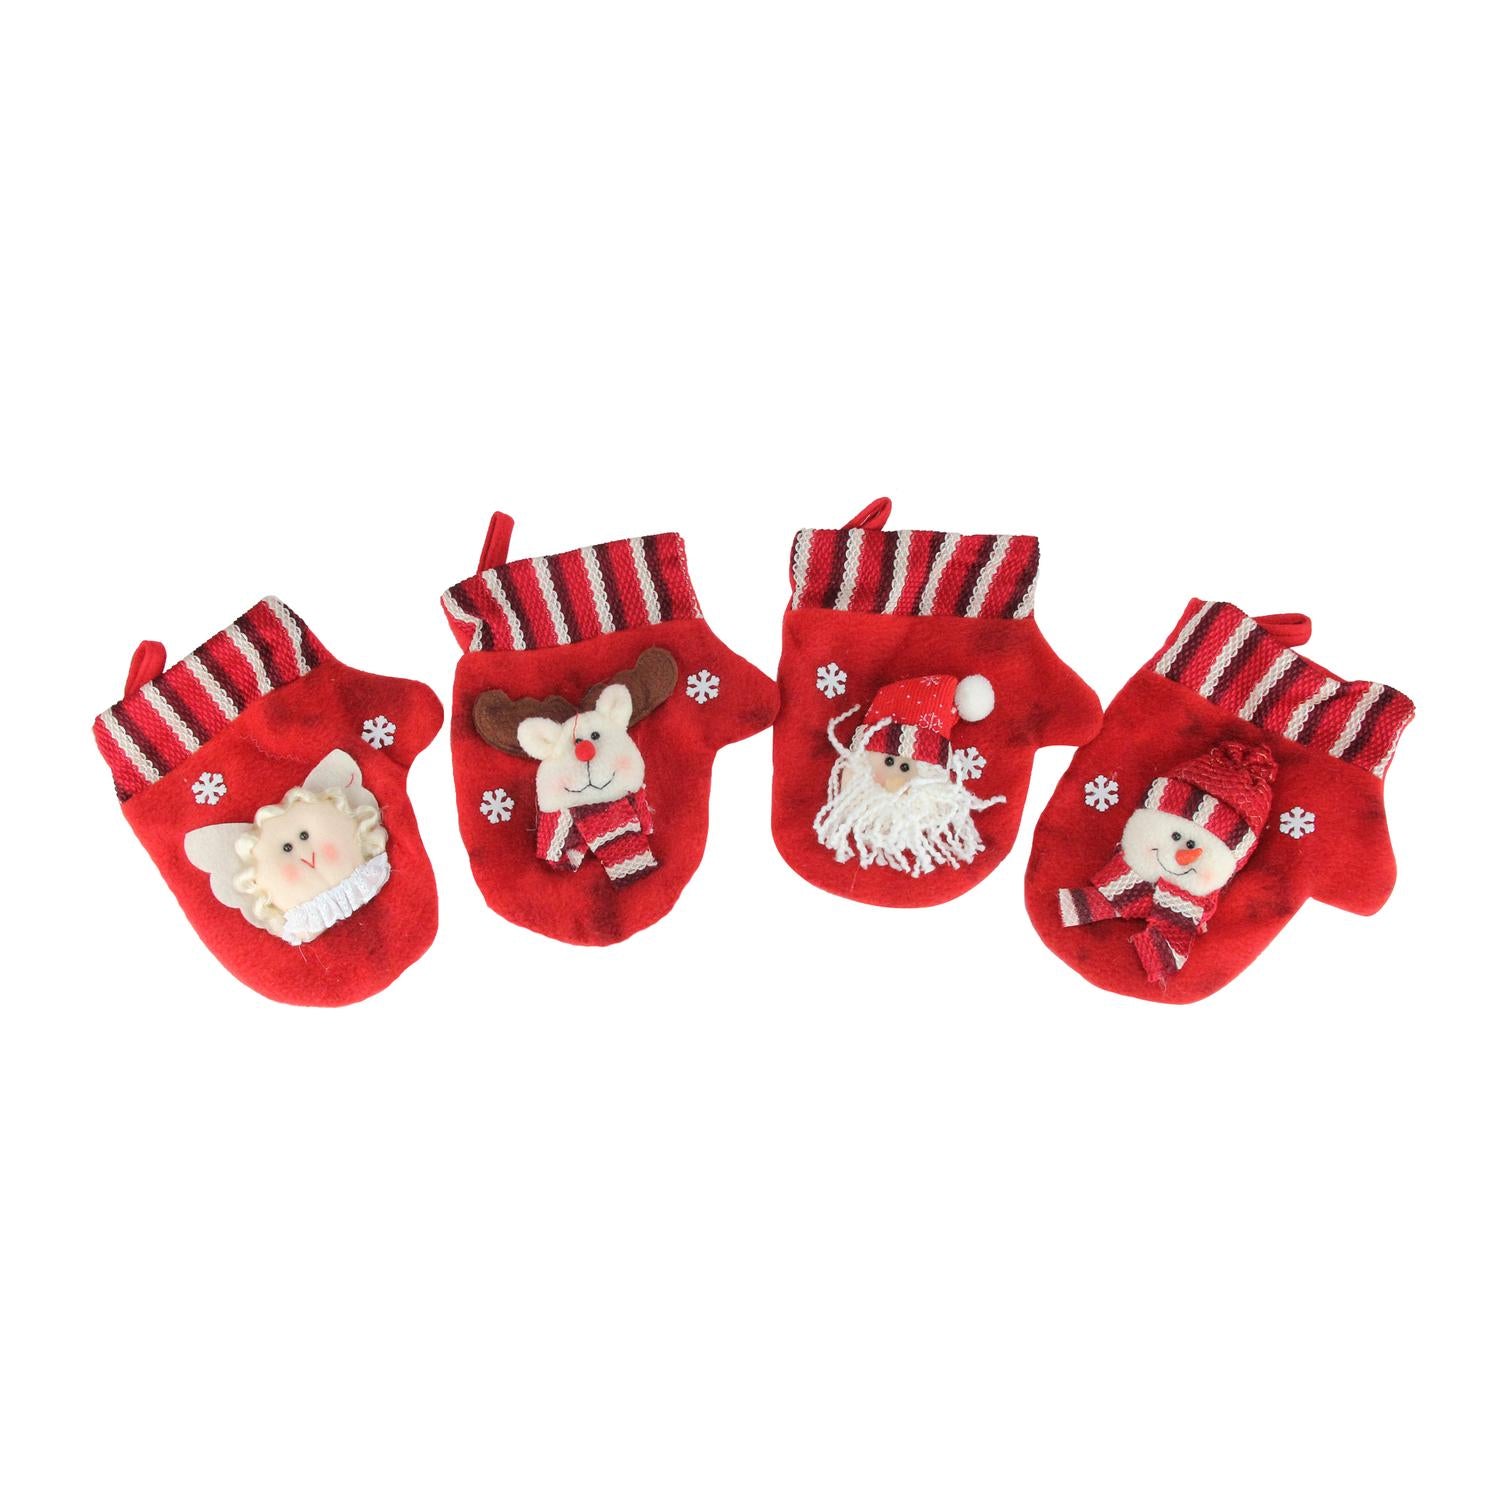 10-Piece Red Classics Christmas Stocking and Novelty Gift Bag Set